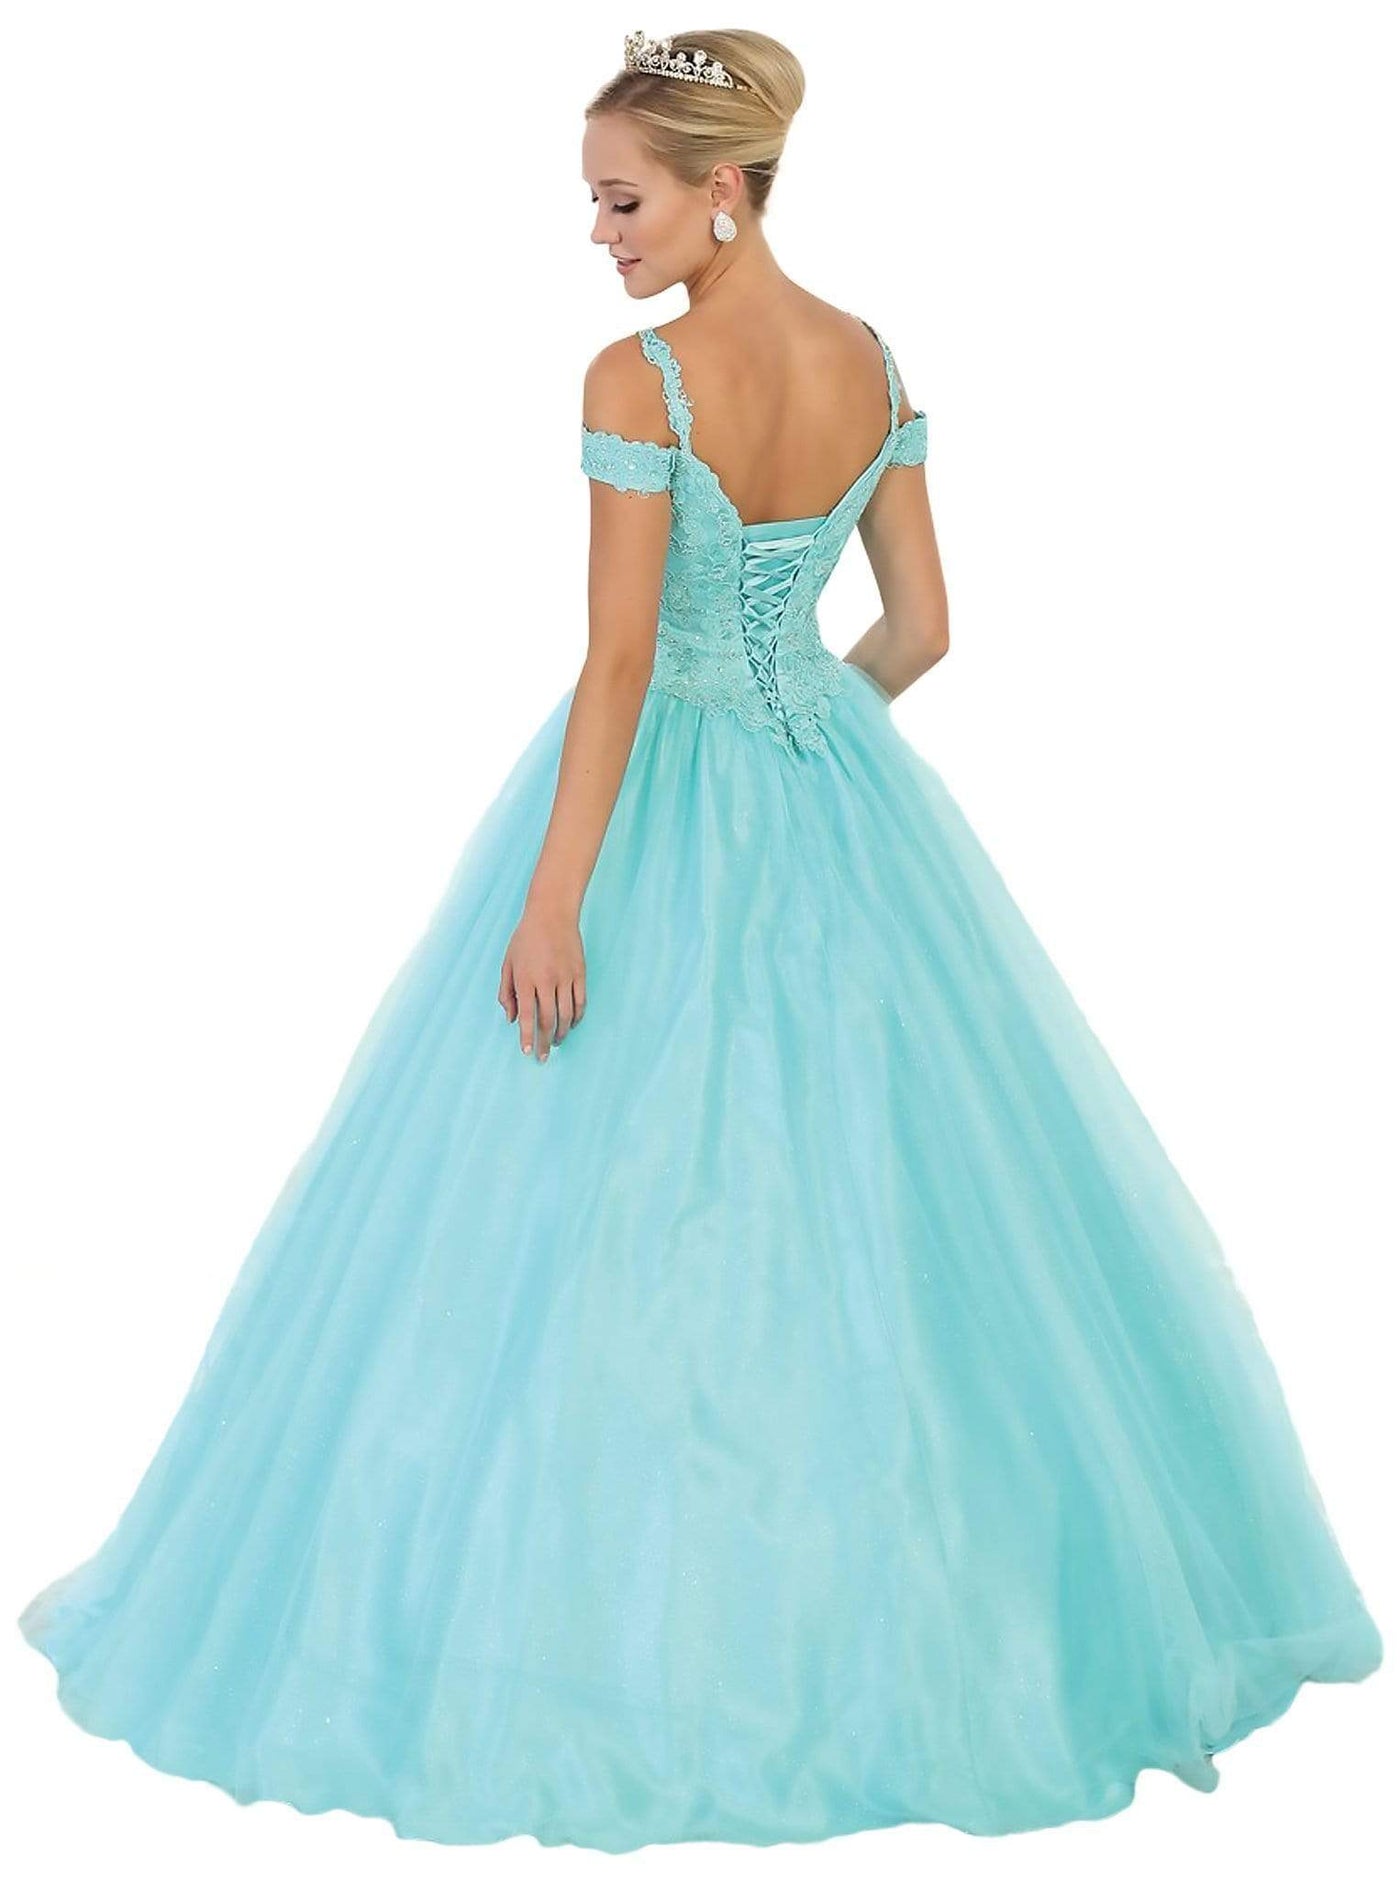 May Queen - Beaded Lace Sweetheart Quinceanera Ballgown Quinceanera Dresses